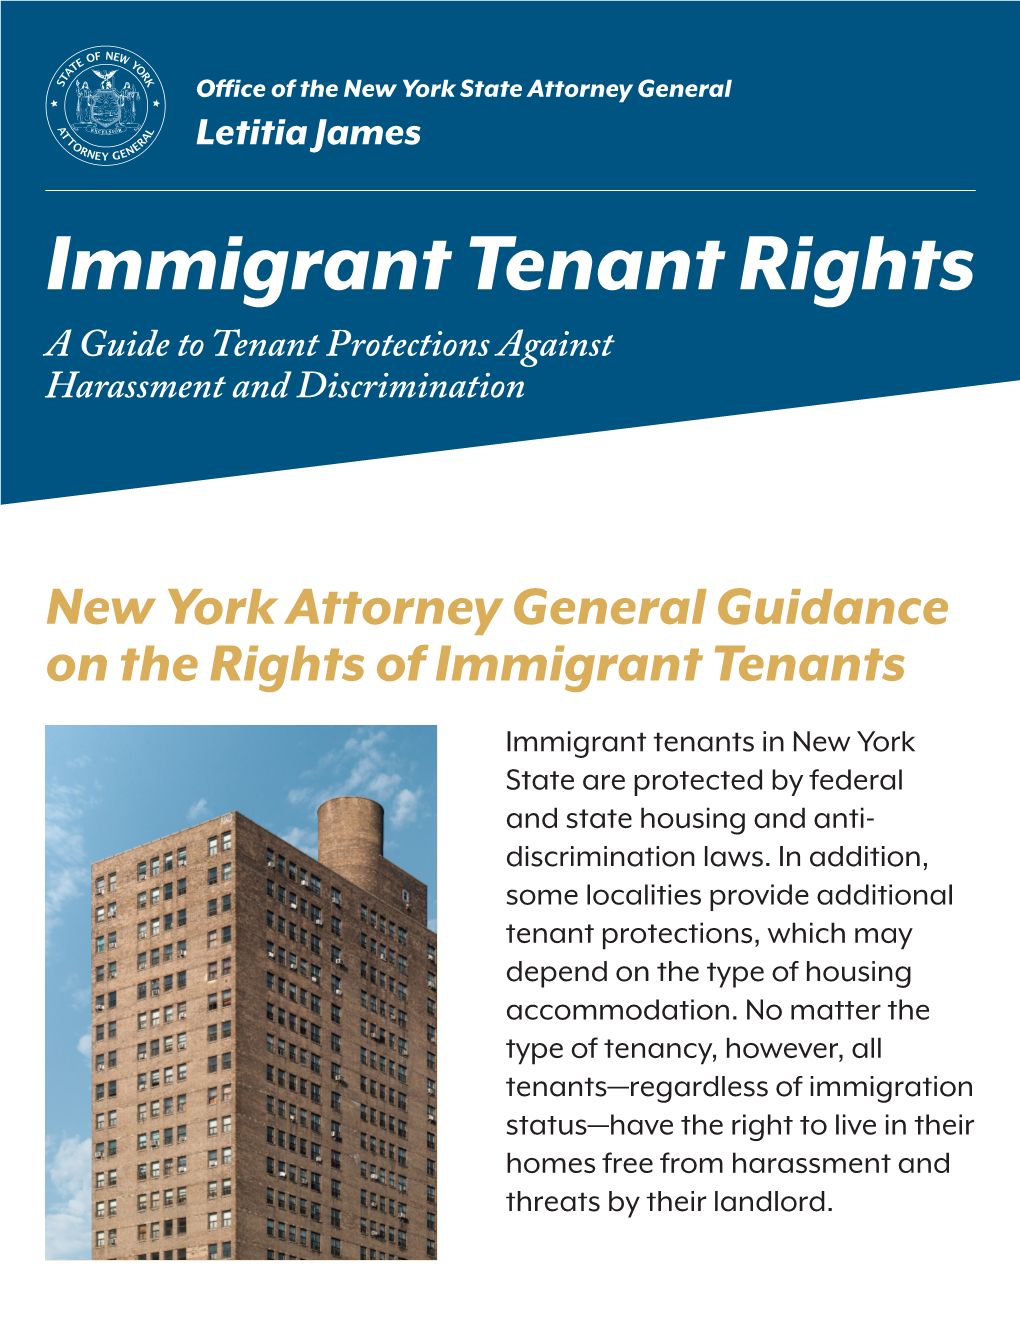 Immigrant Tenant Rights a Guide to Tenant Protections Against Harassment and Discrimination